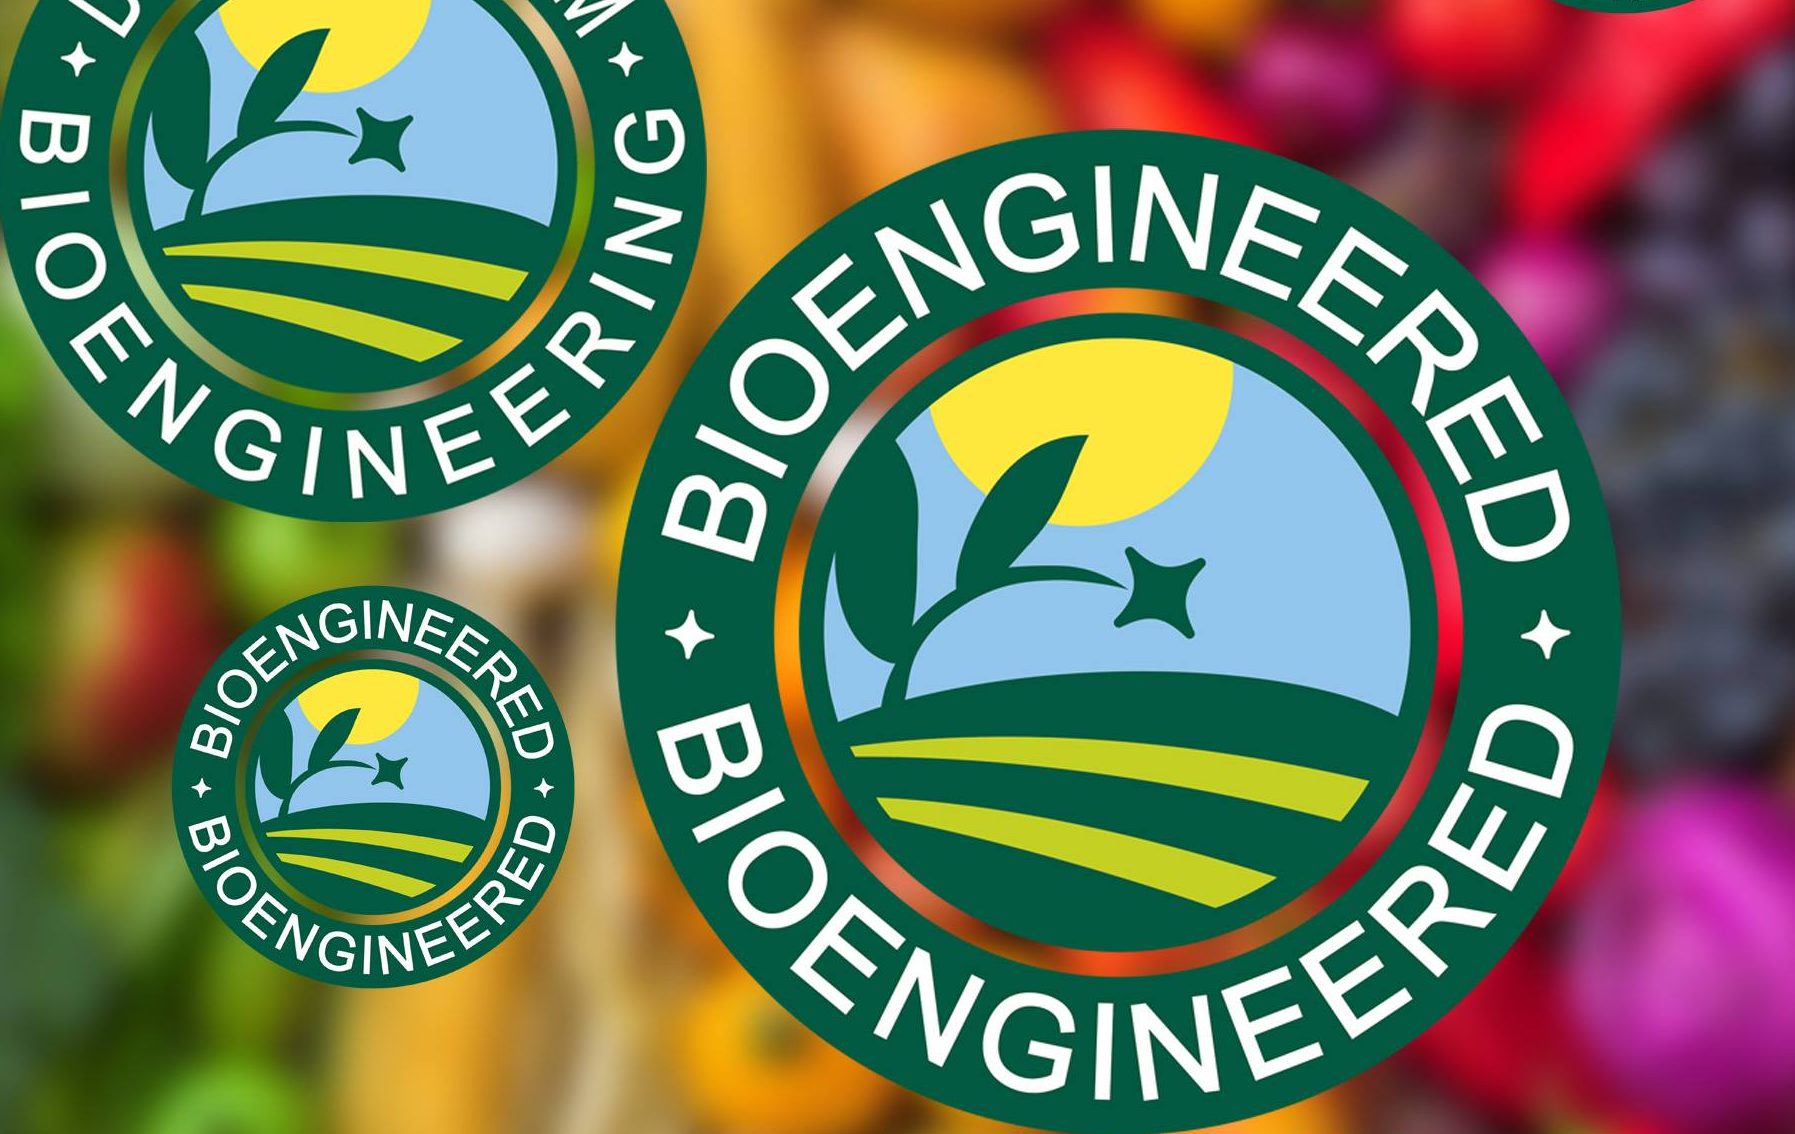 Figure 1. New Bioengineered food label with produce in background.. Composite made using iStock image by Bojsha65